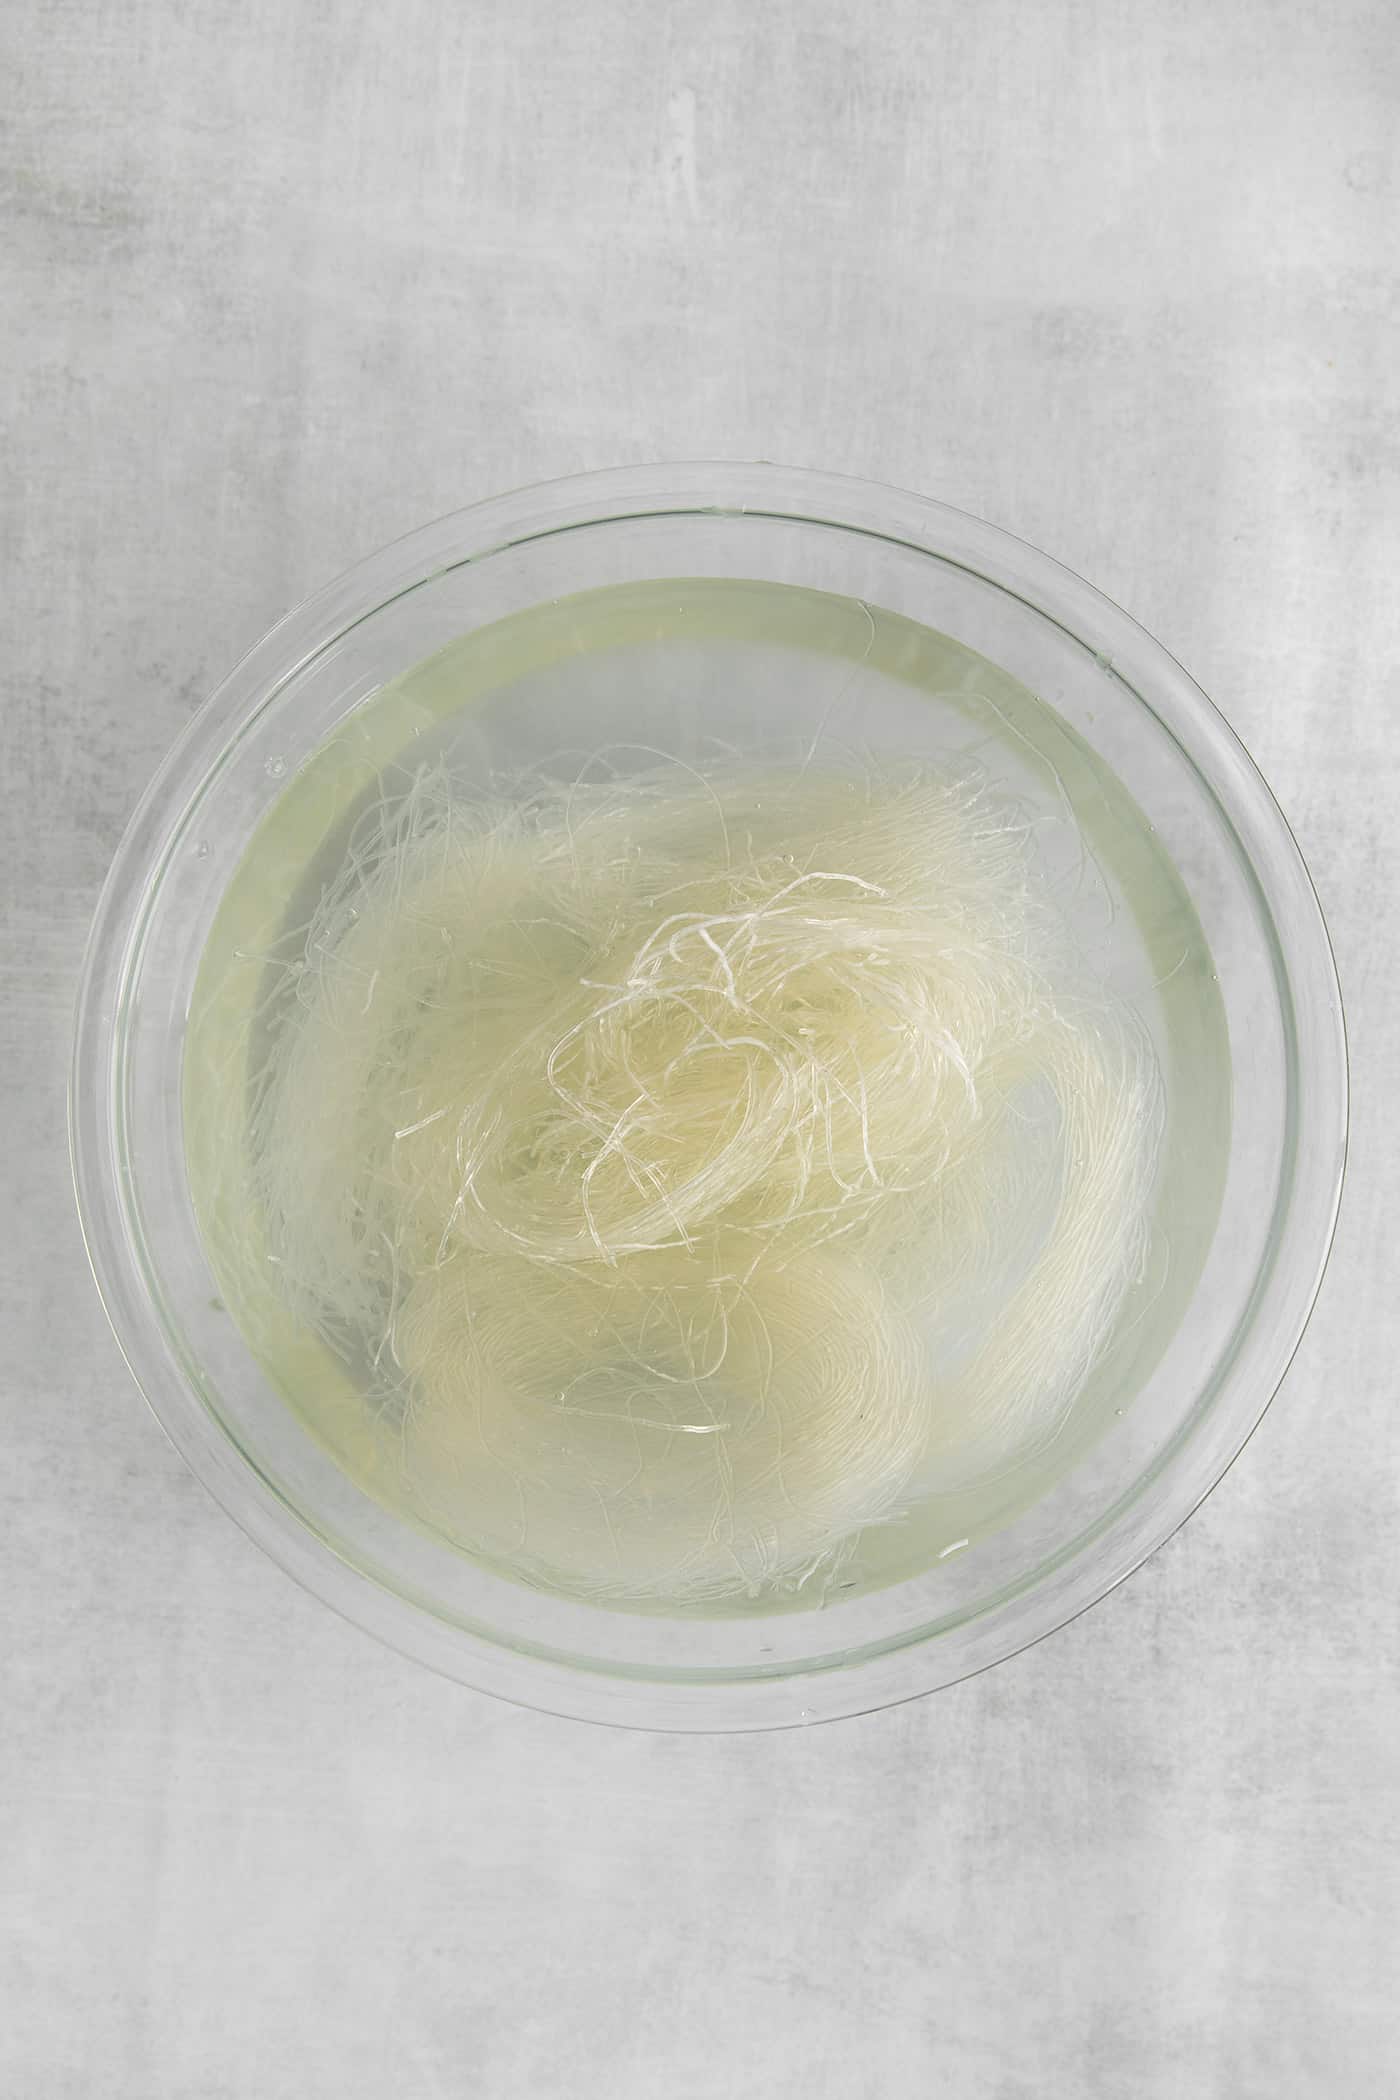 Glass noodles soaking in water